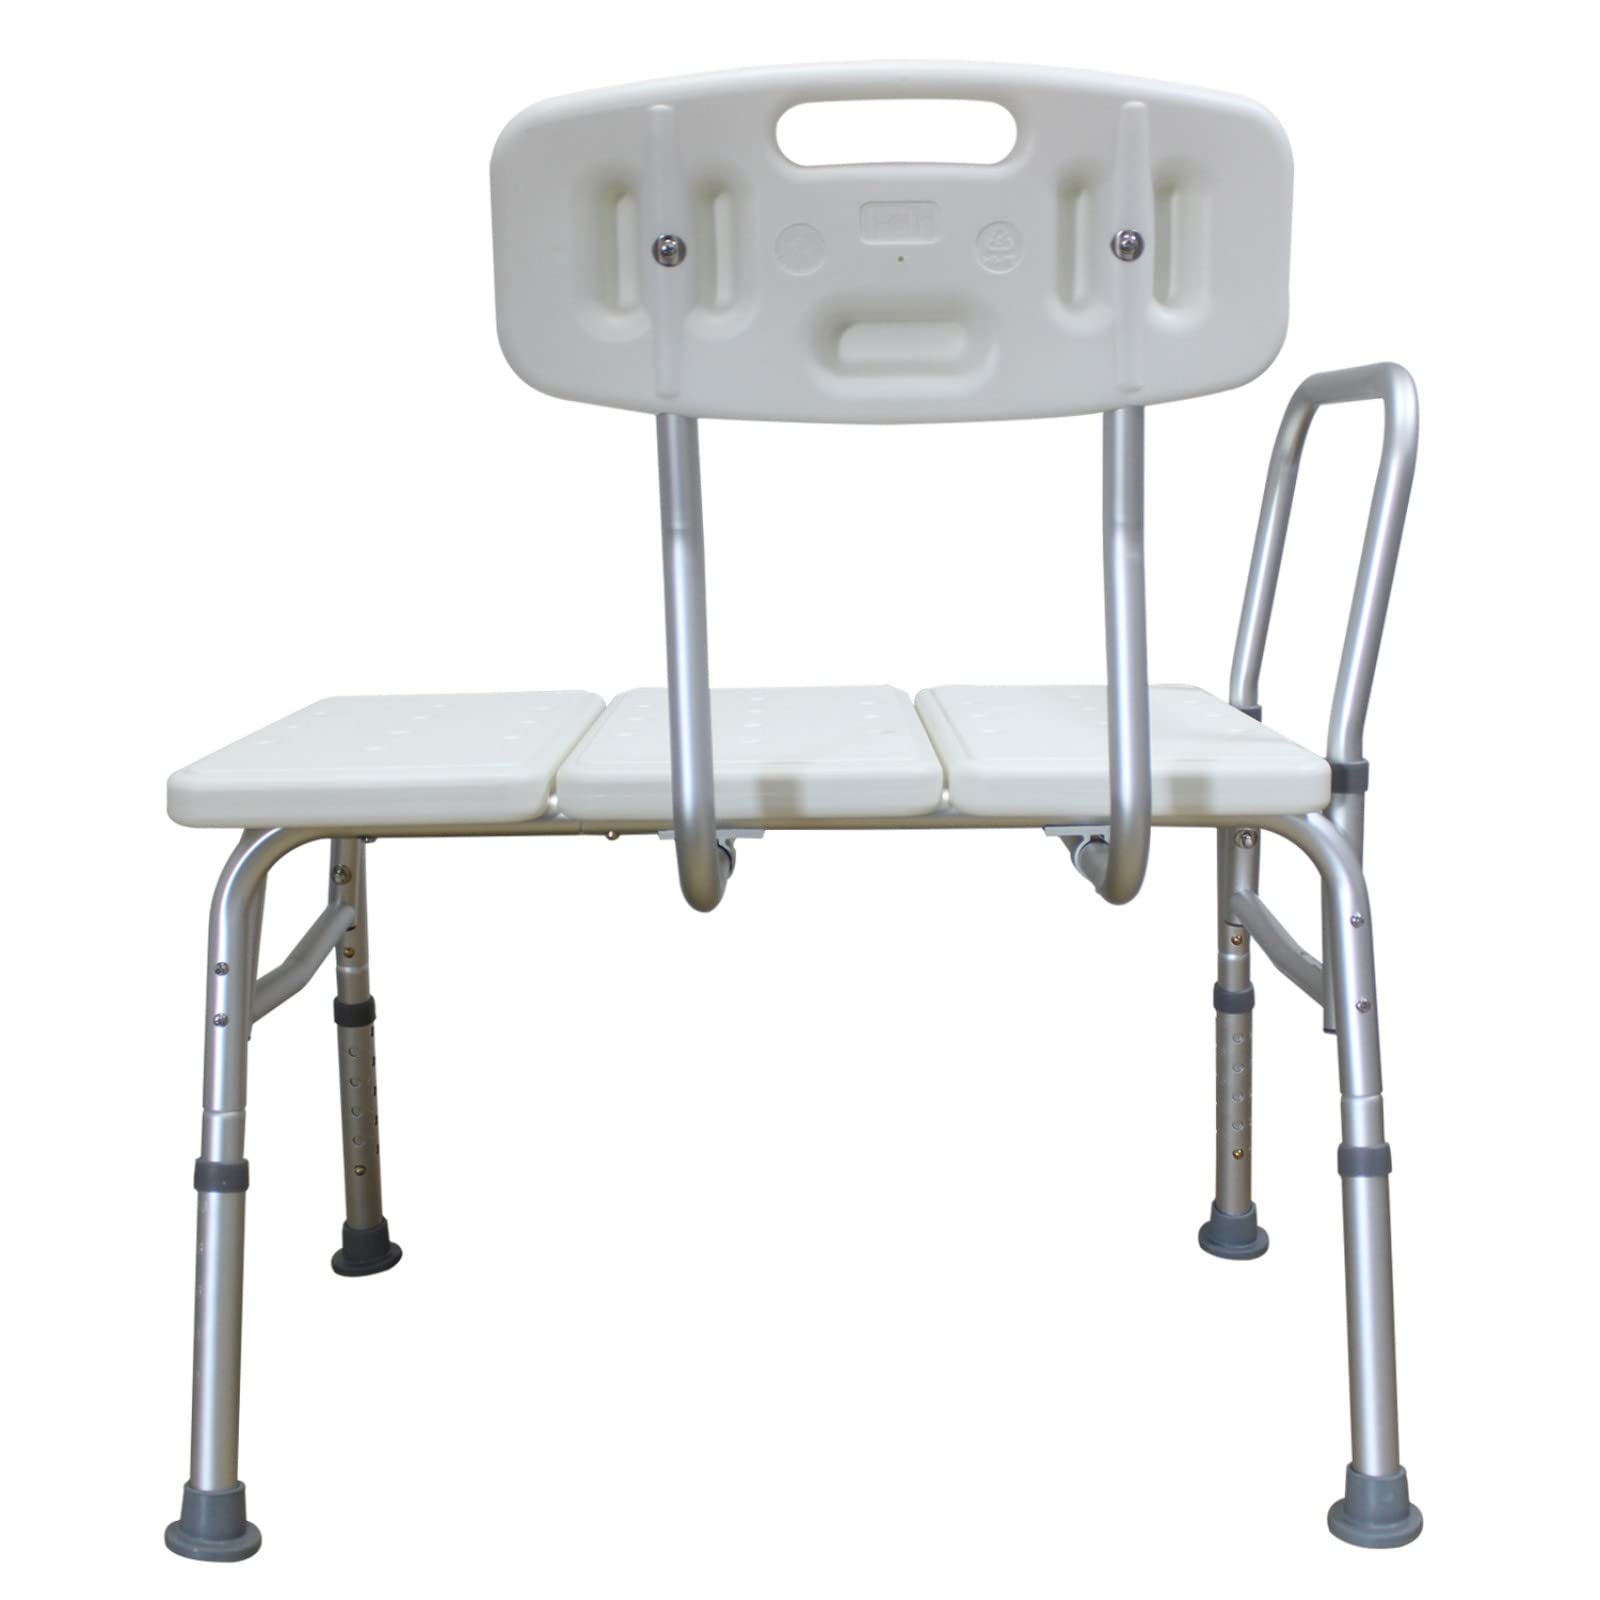 Winado Tub Transfer Bench for Bathtub with Backrest & Armrest, Supports up to 330 lbs Aluminium Alloy Bath Chair, White